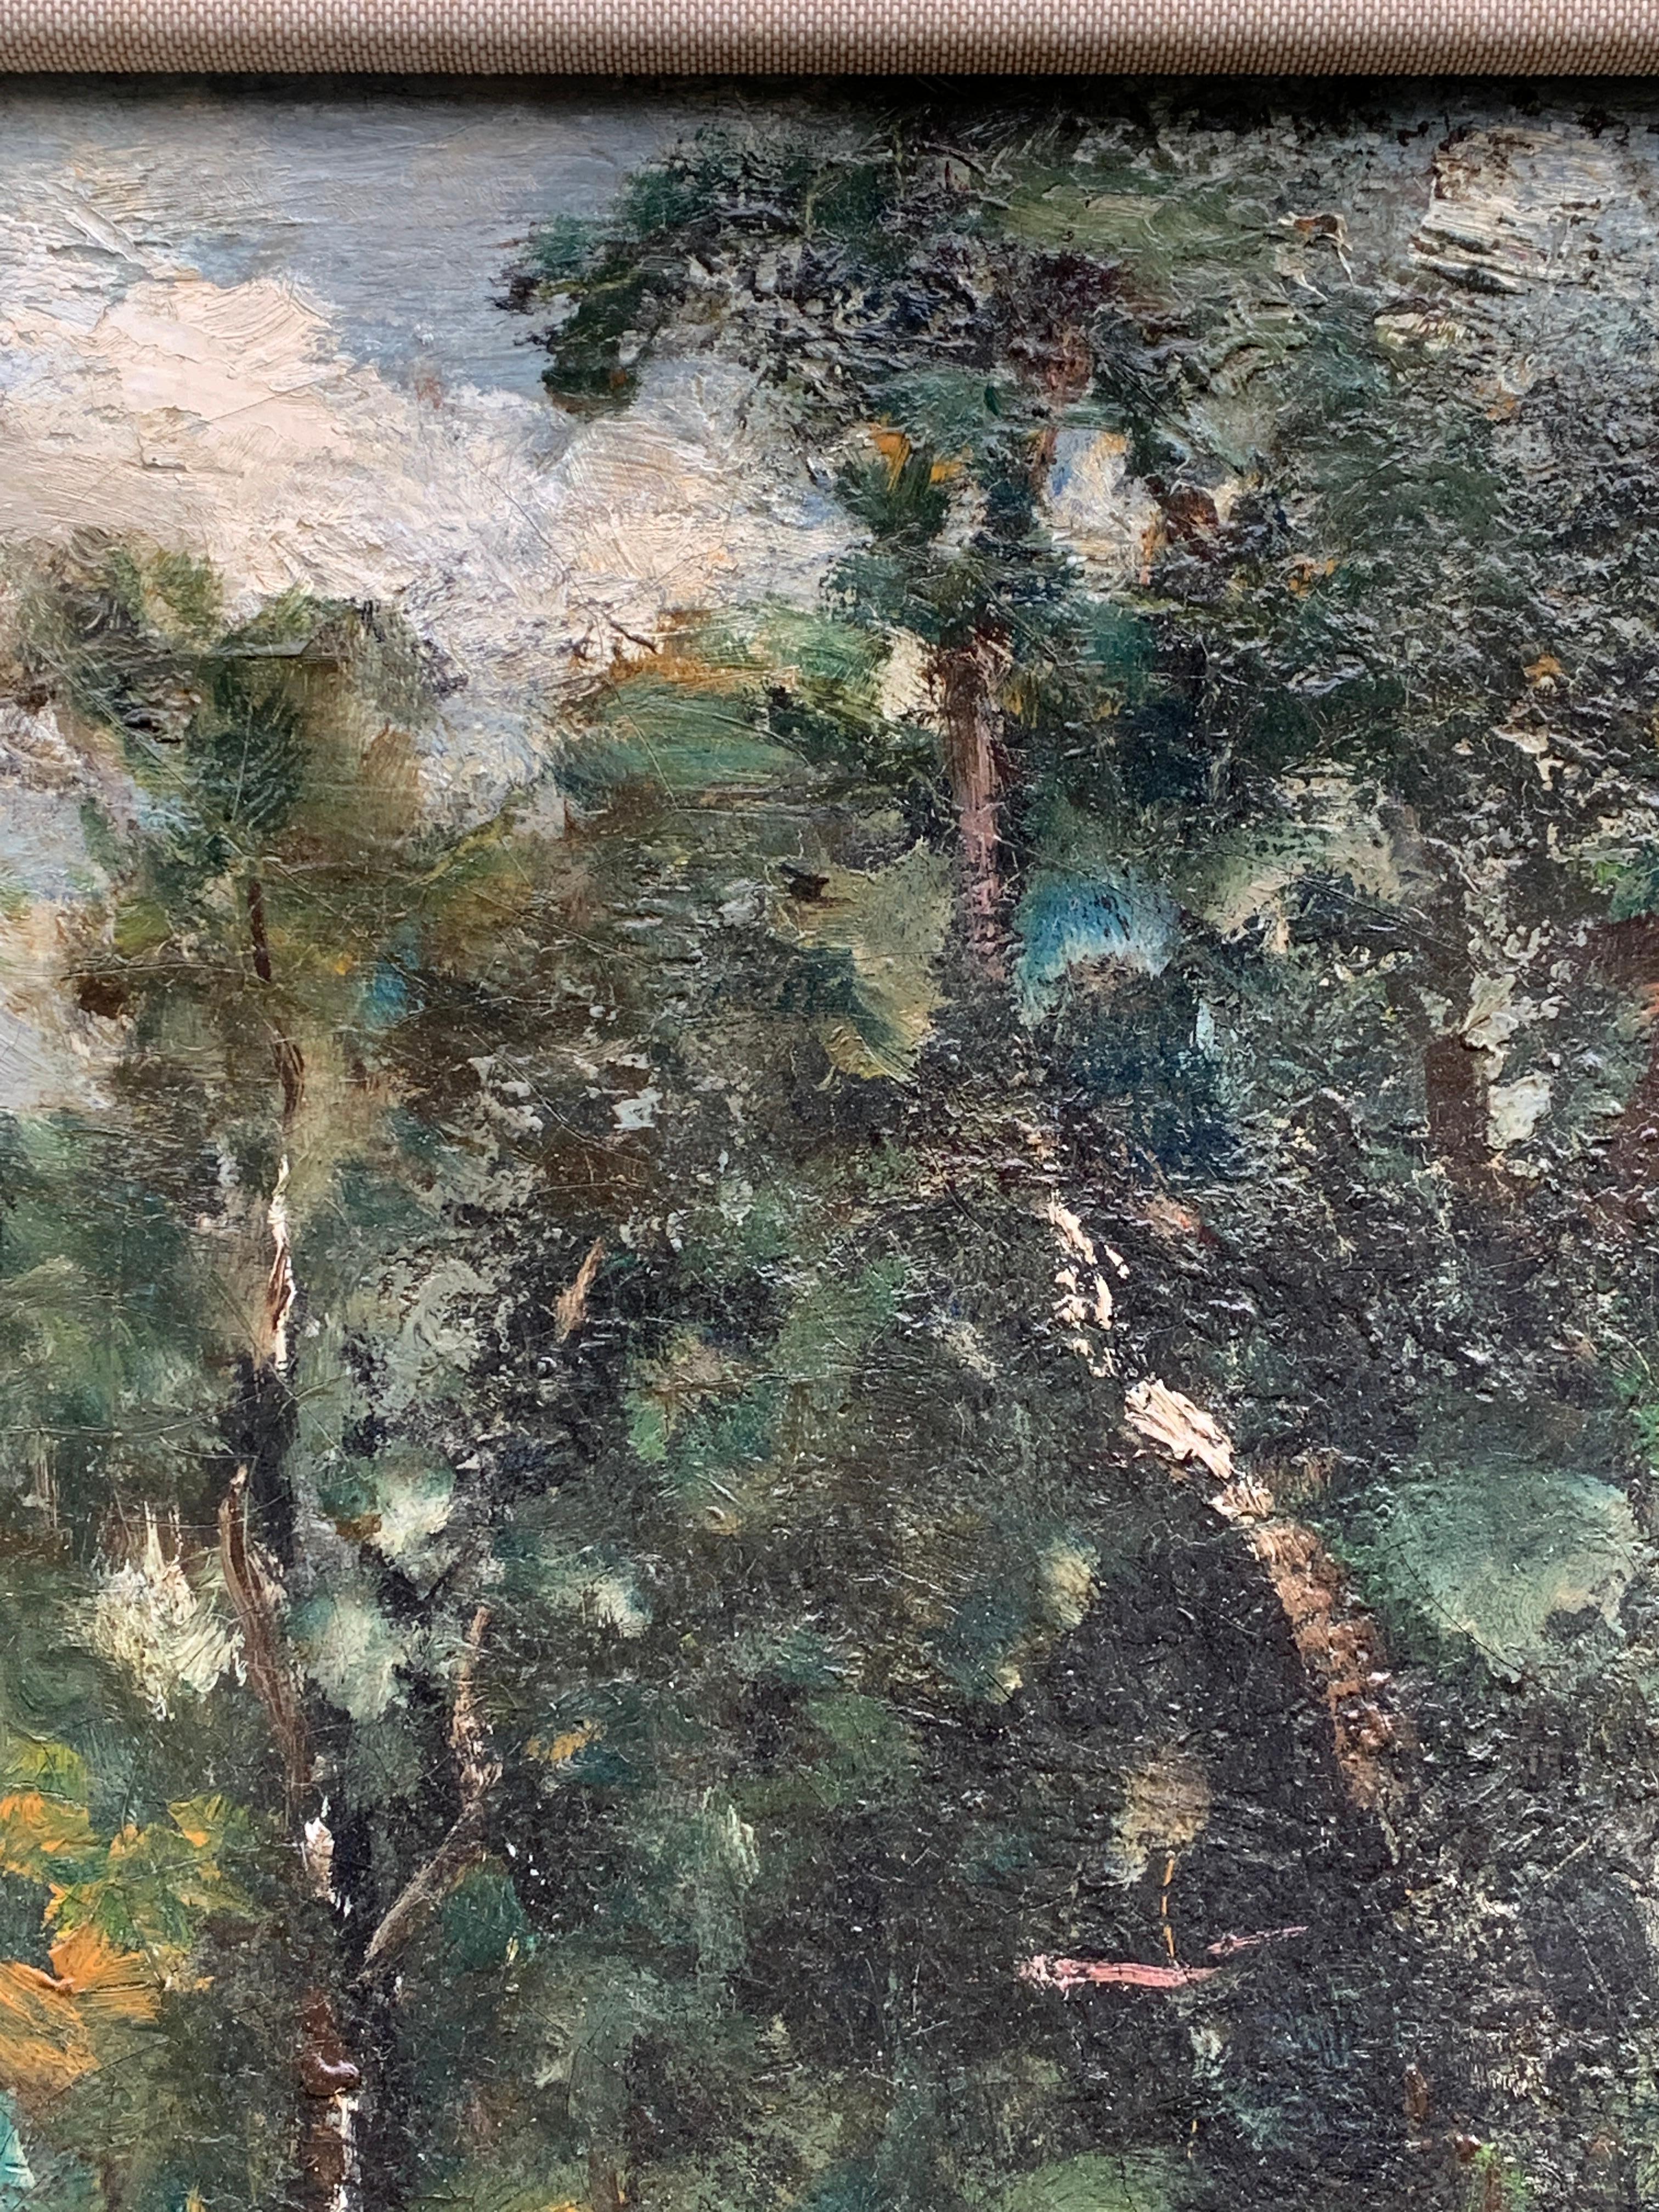 19th century  English impressionist scene of the Barbizon forest, near Paris France.

 Boyle was a pioneering 19th-century British artist inspired by the European Impressionist painters.

Influence of the French Barbizon school is very evident in